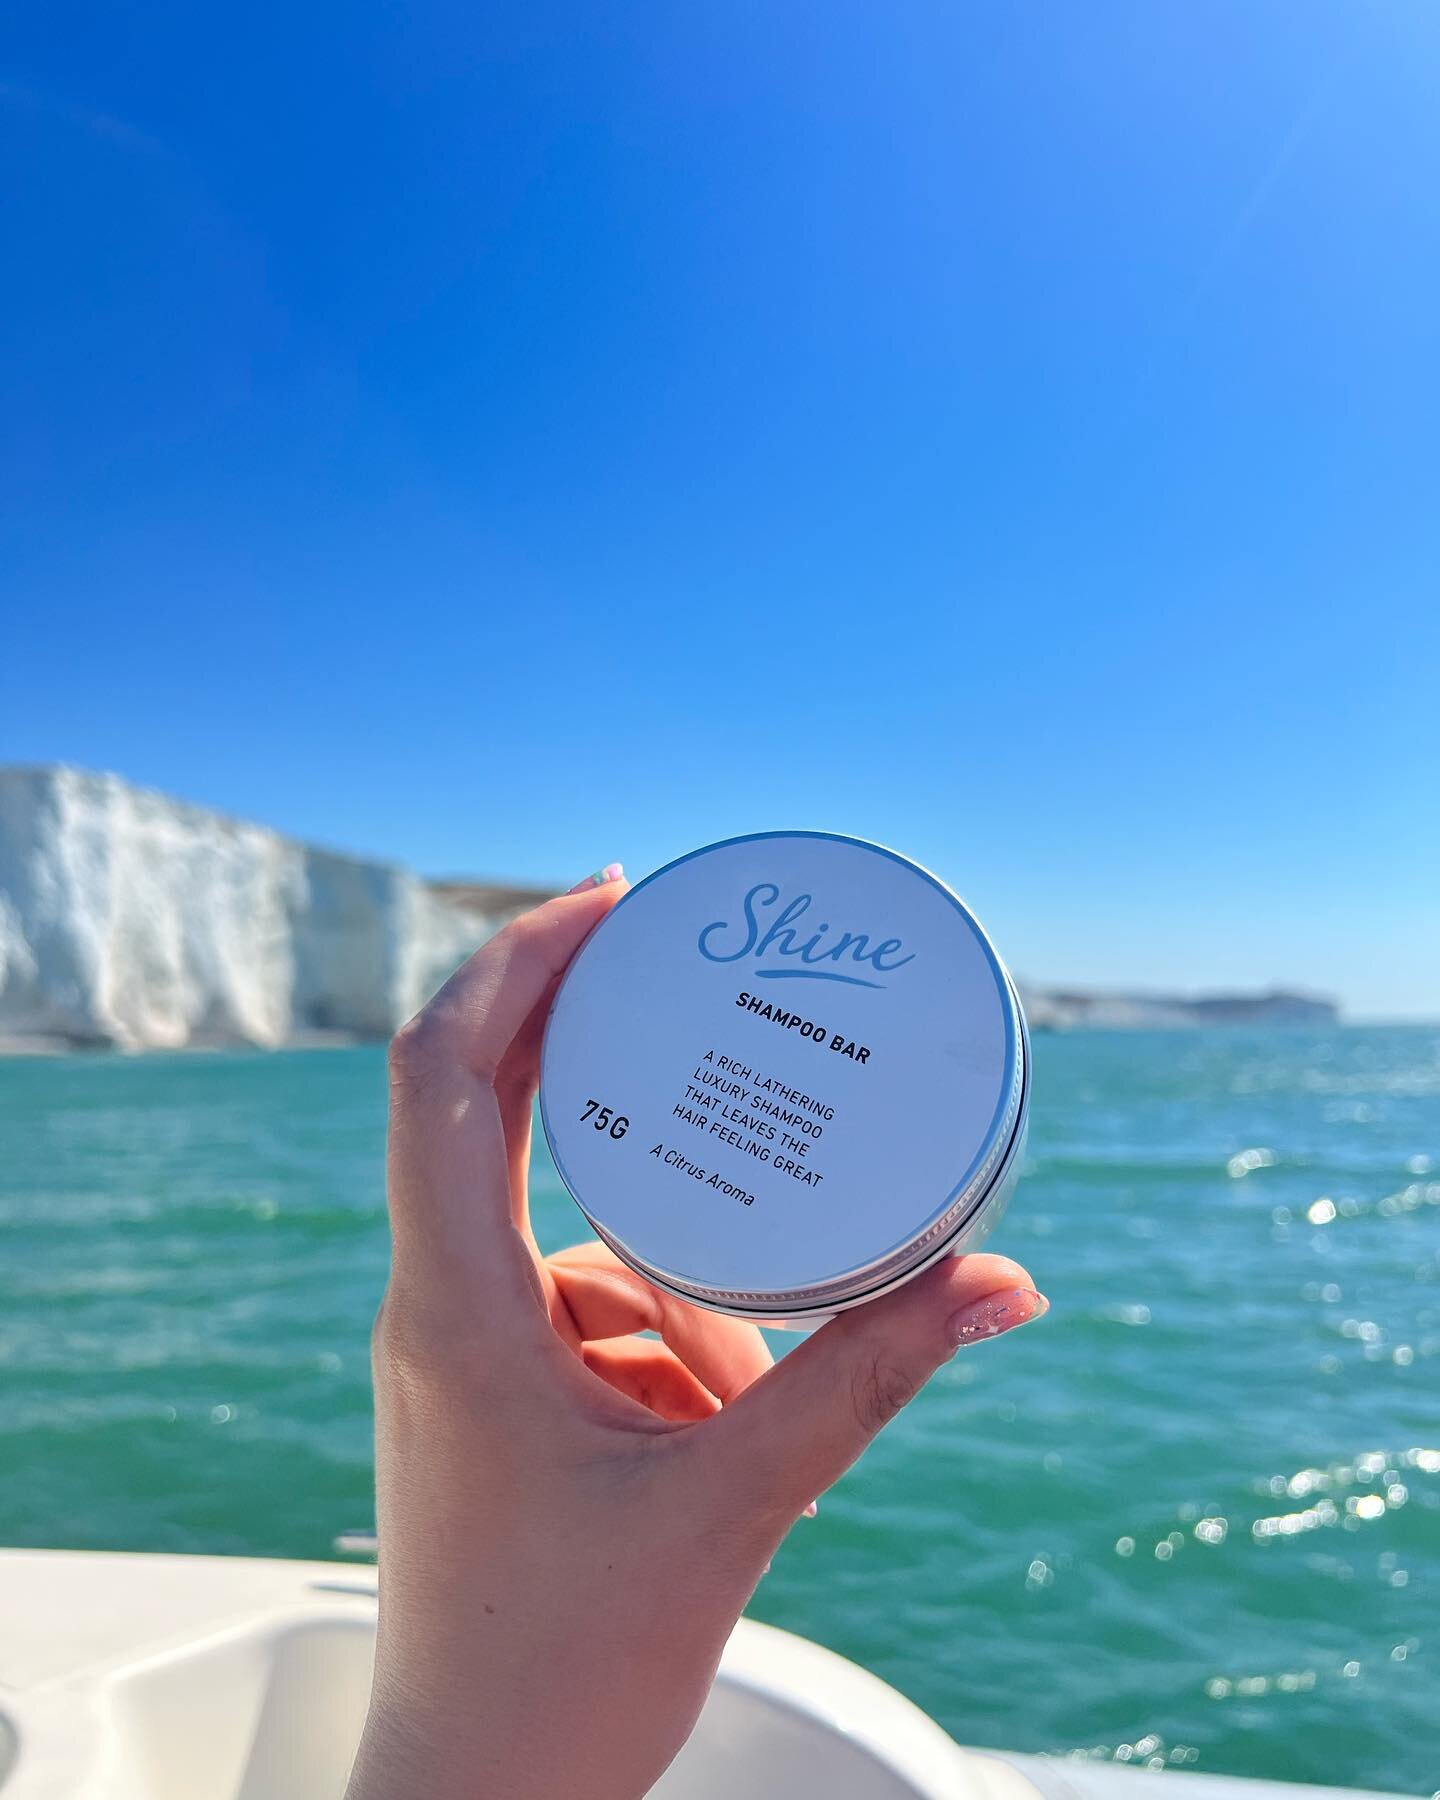 Shine bar spotted boating around near the seven sisters last weekend.

Bar in the bag &amp; always ready to cleanse - with no worries about spillages. 🫗

Who wants the sun back already?☀️☔️